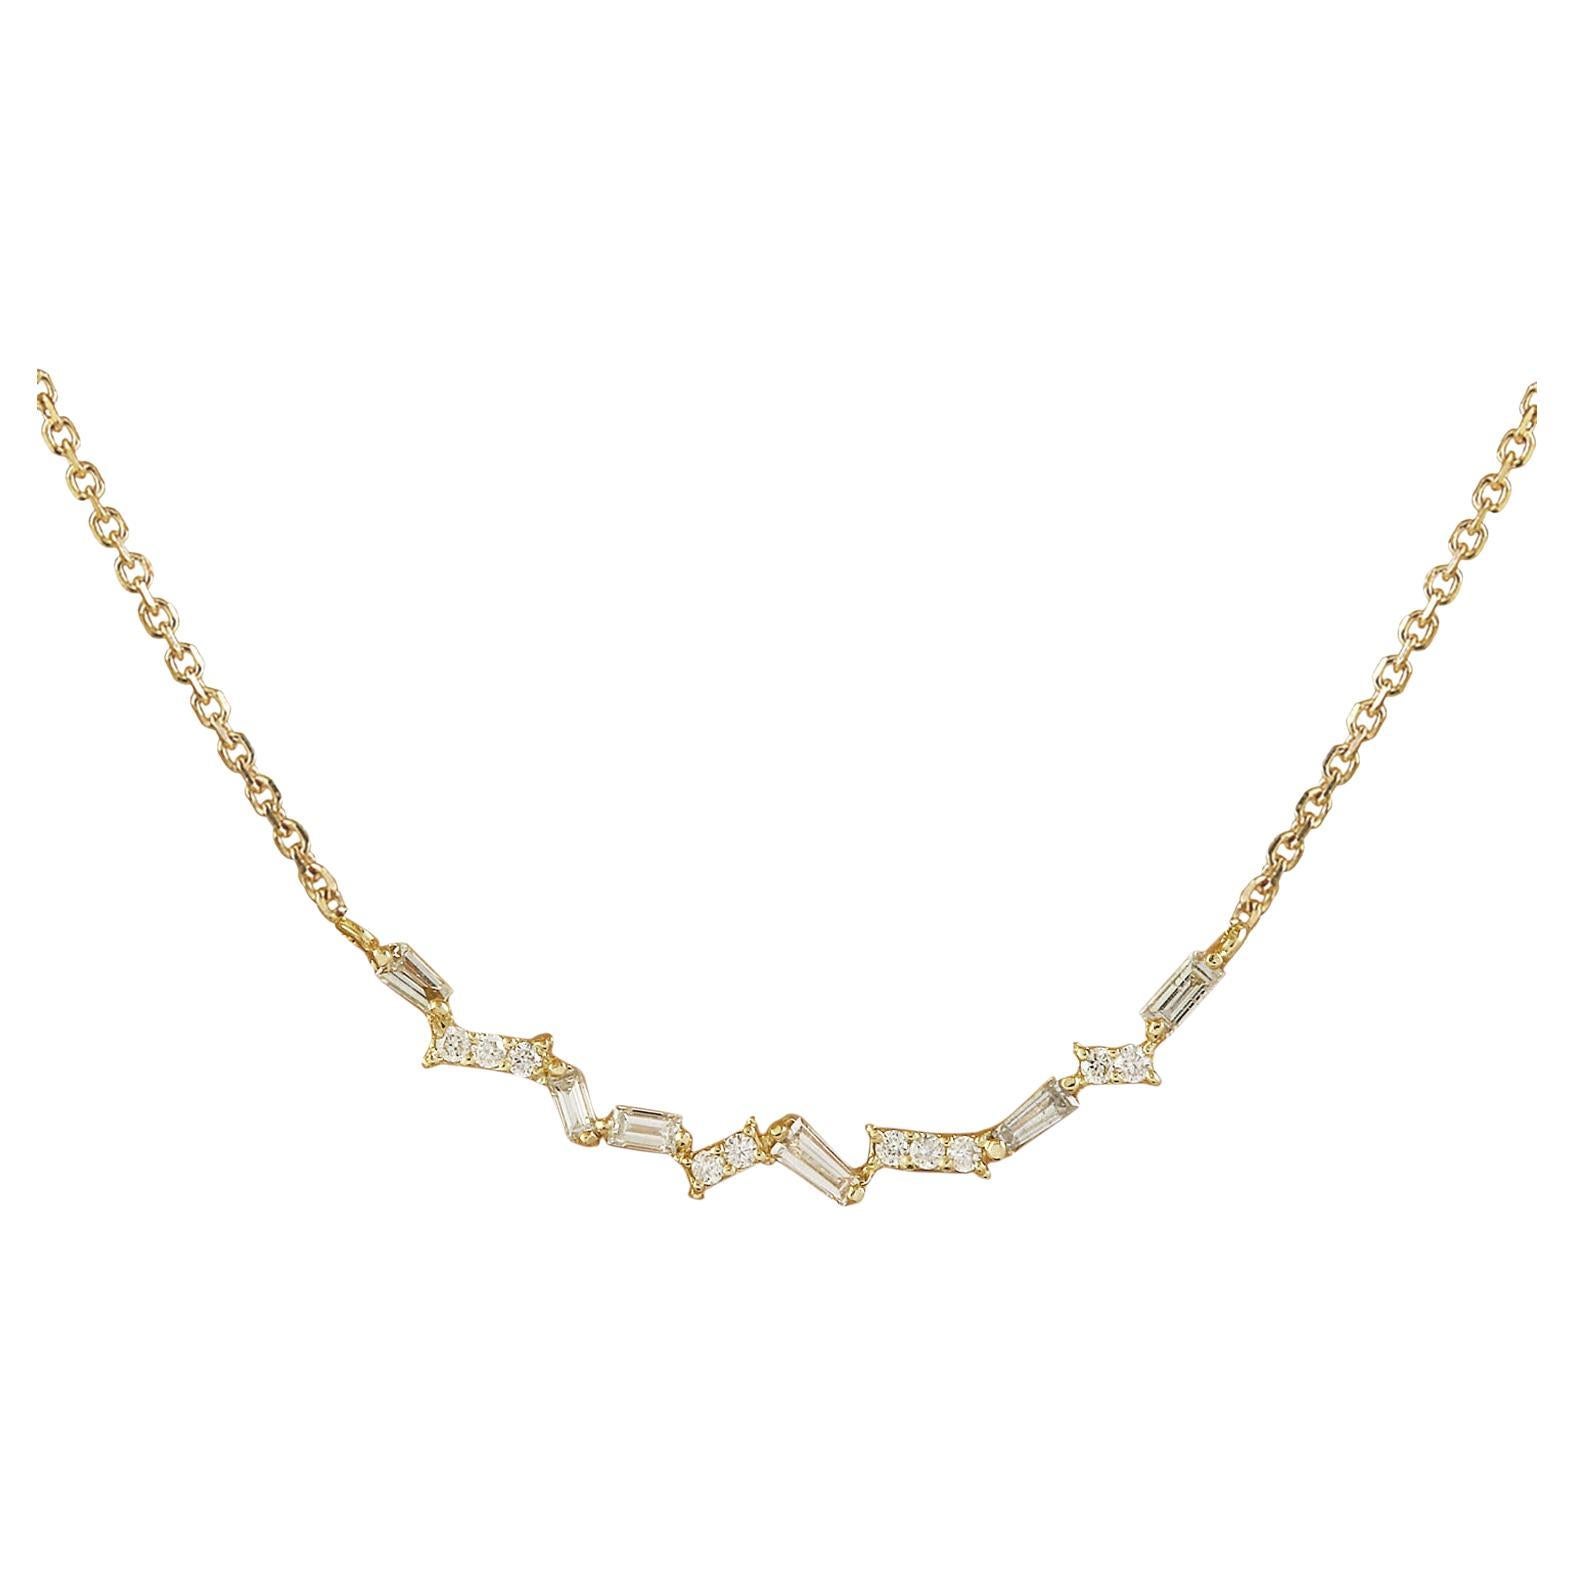 Exquisite Natural Diamond Necklace In 14 Karat Yellow Gold 